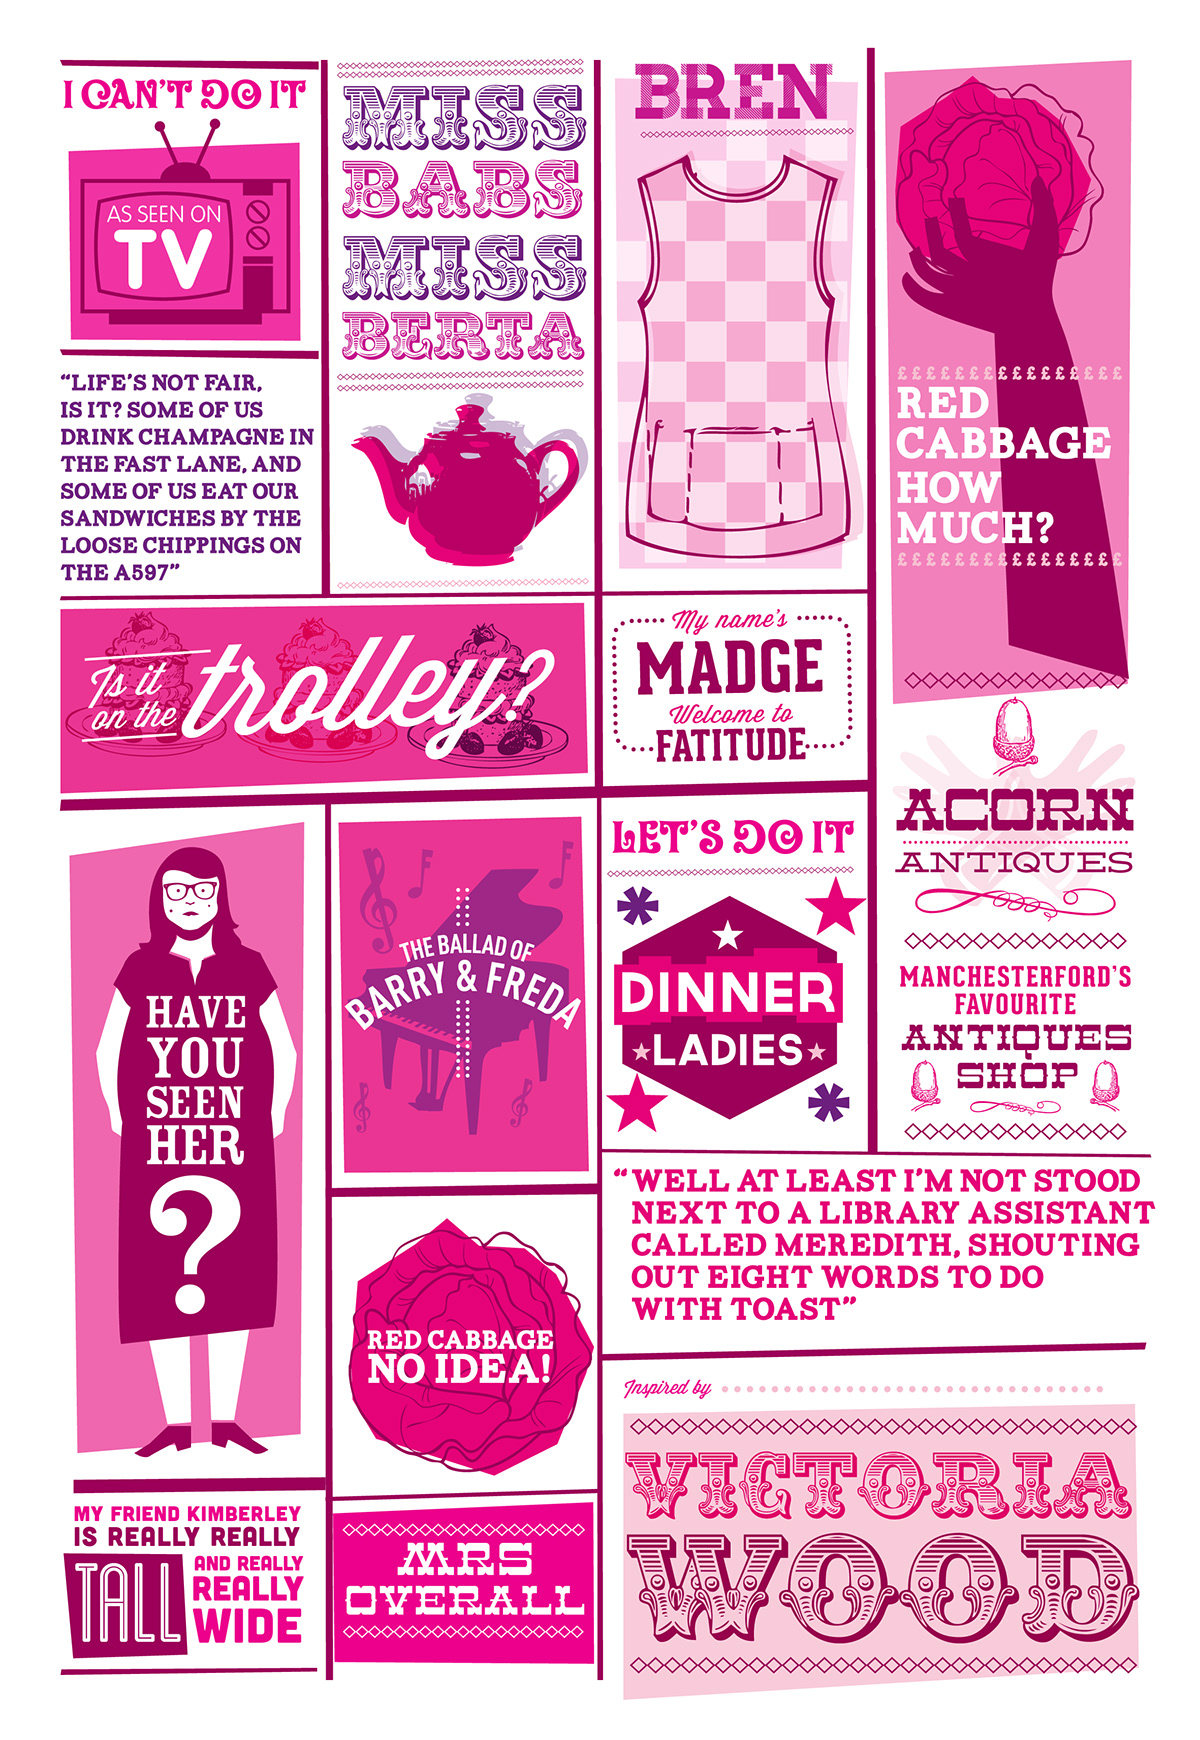 Victoria Wood tv comédienne BBC comedy  Acorn Antiques Red Cabbage Dinnerladies illustrations vector iTV Entertainment graphics poster print